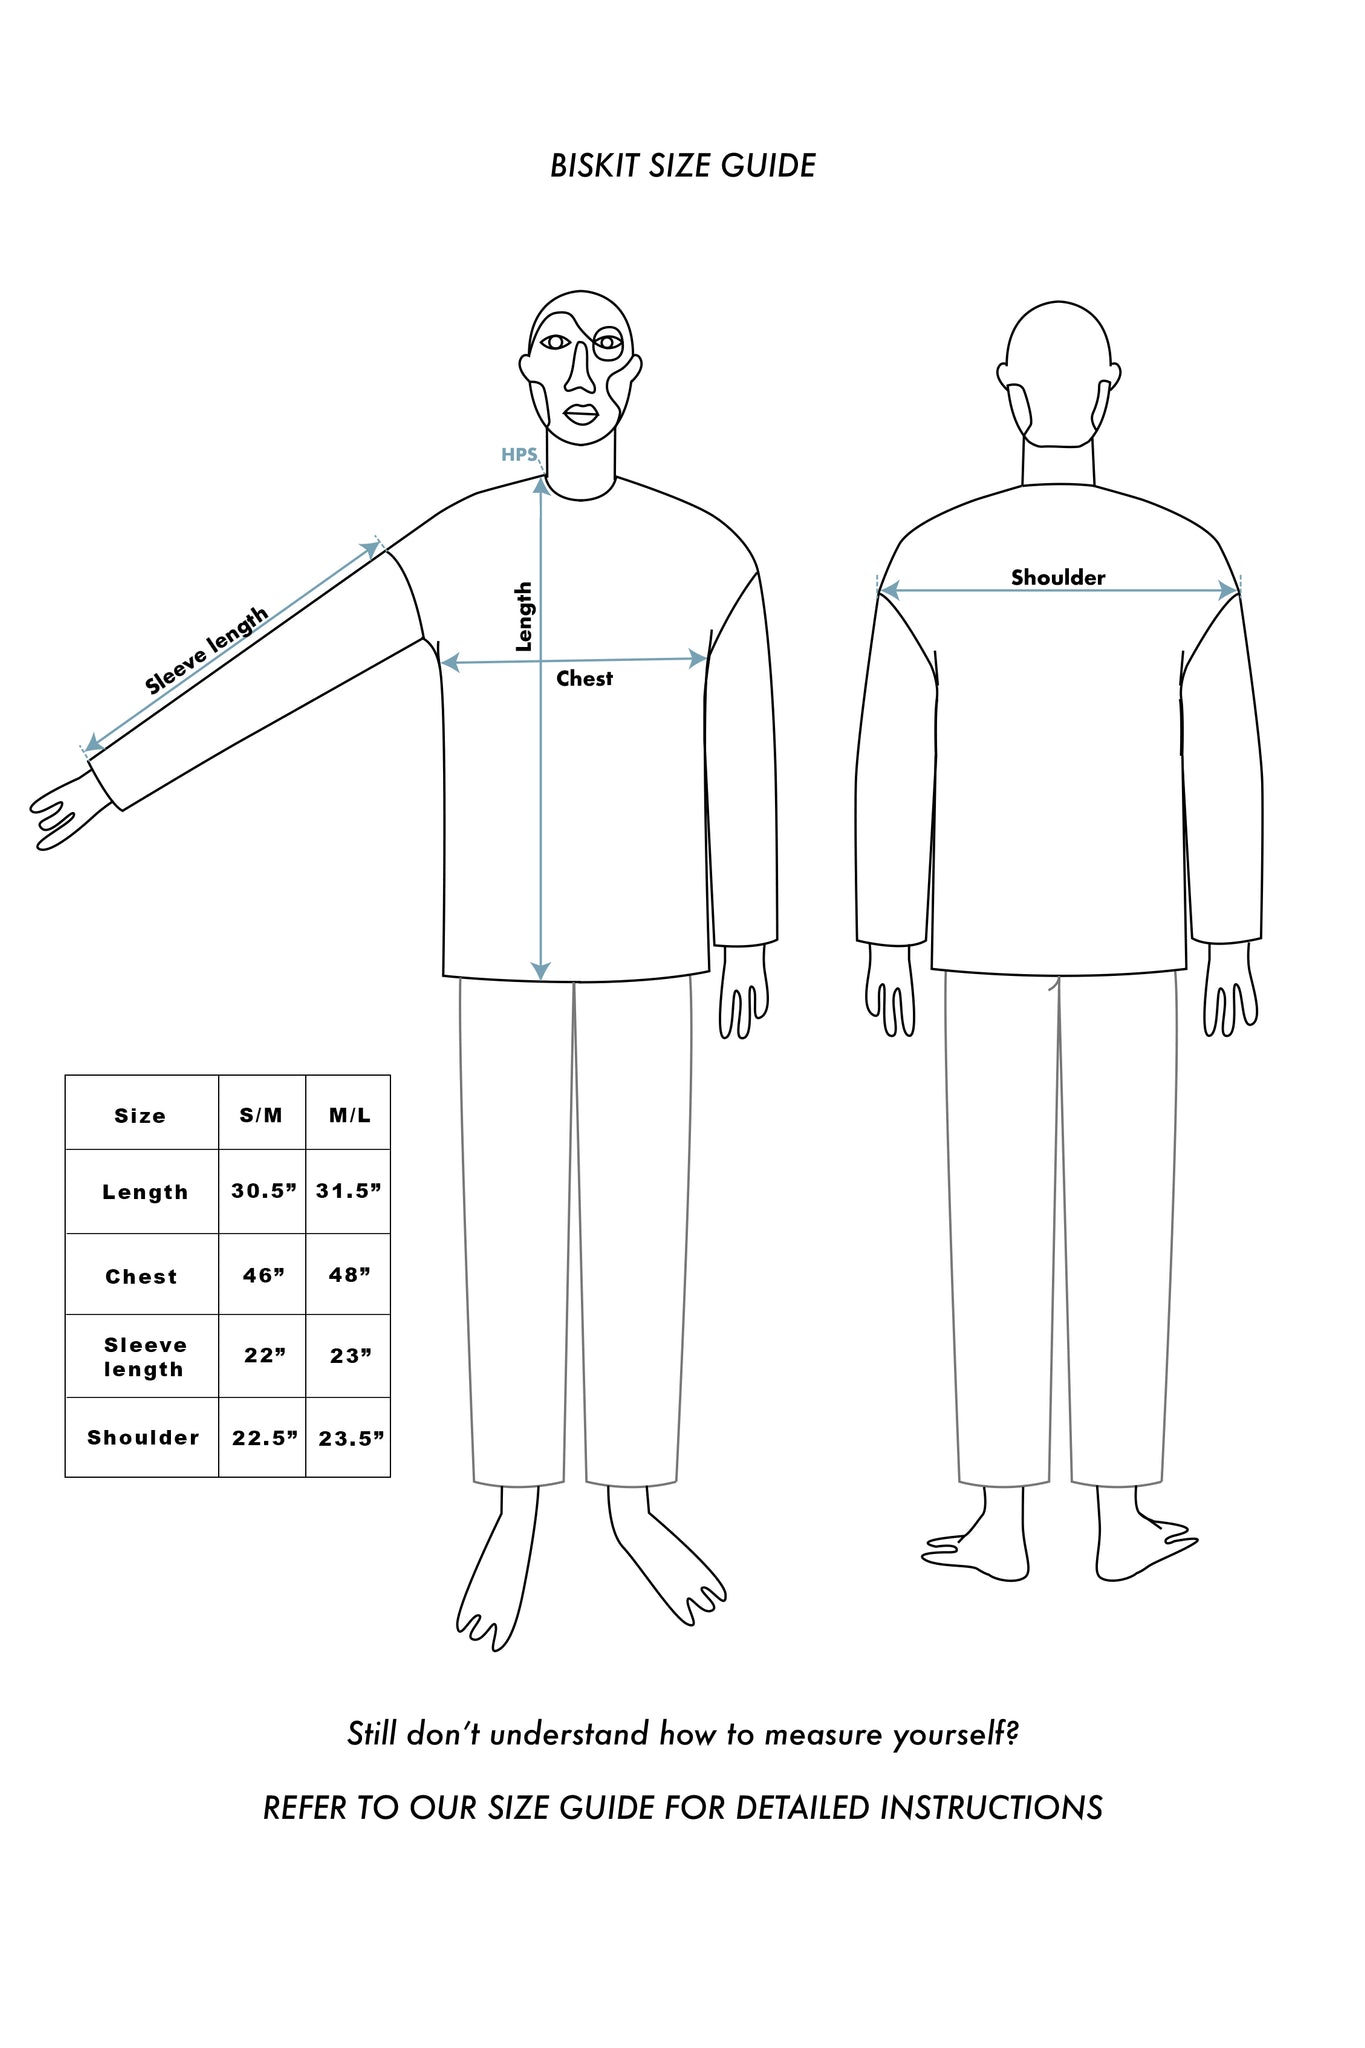 We do not follow standard sizing - Please refer to our size guide for more information on how to check your measurements.